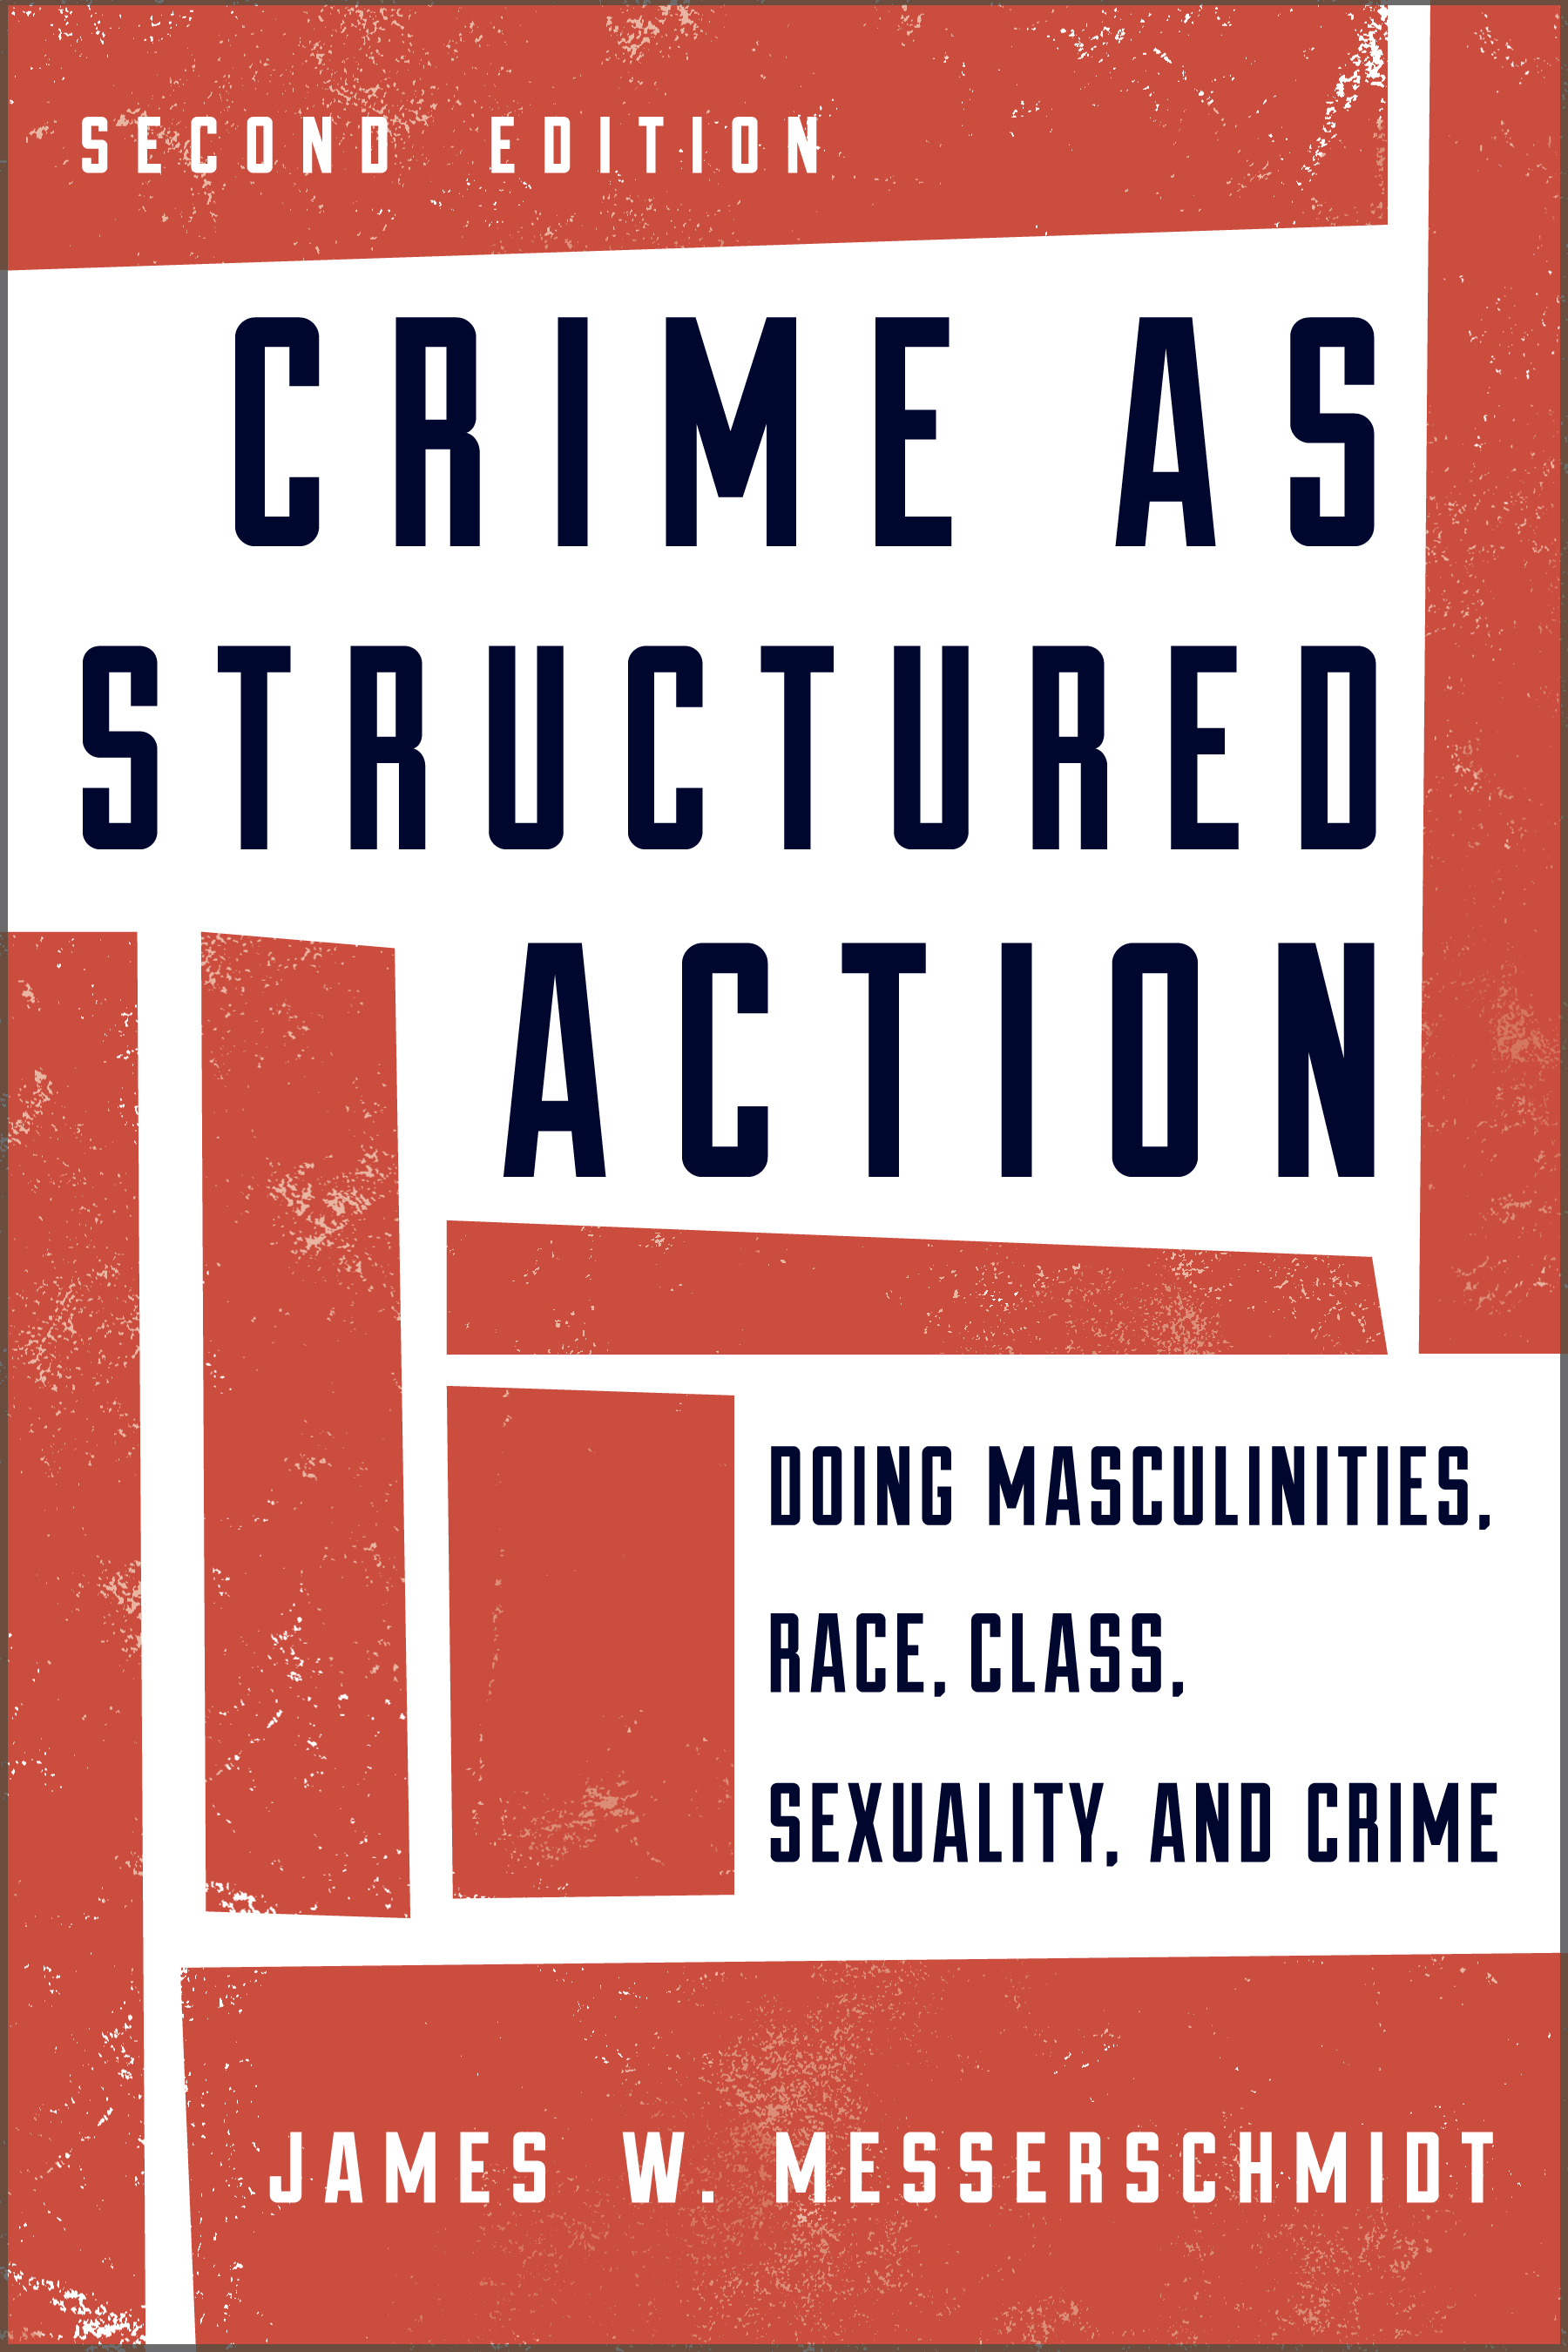 Crime as Structured Action: Doing Masculinities, Race, Class, Sexuality, and Crime